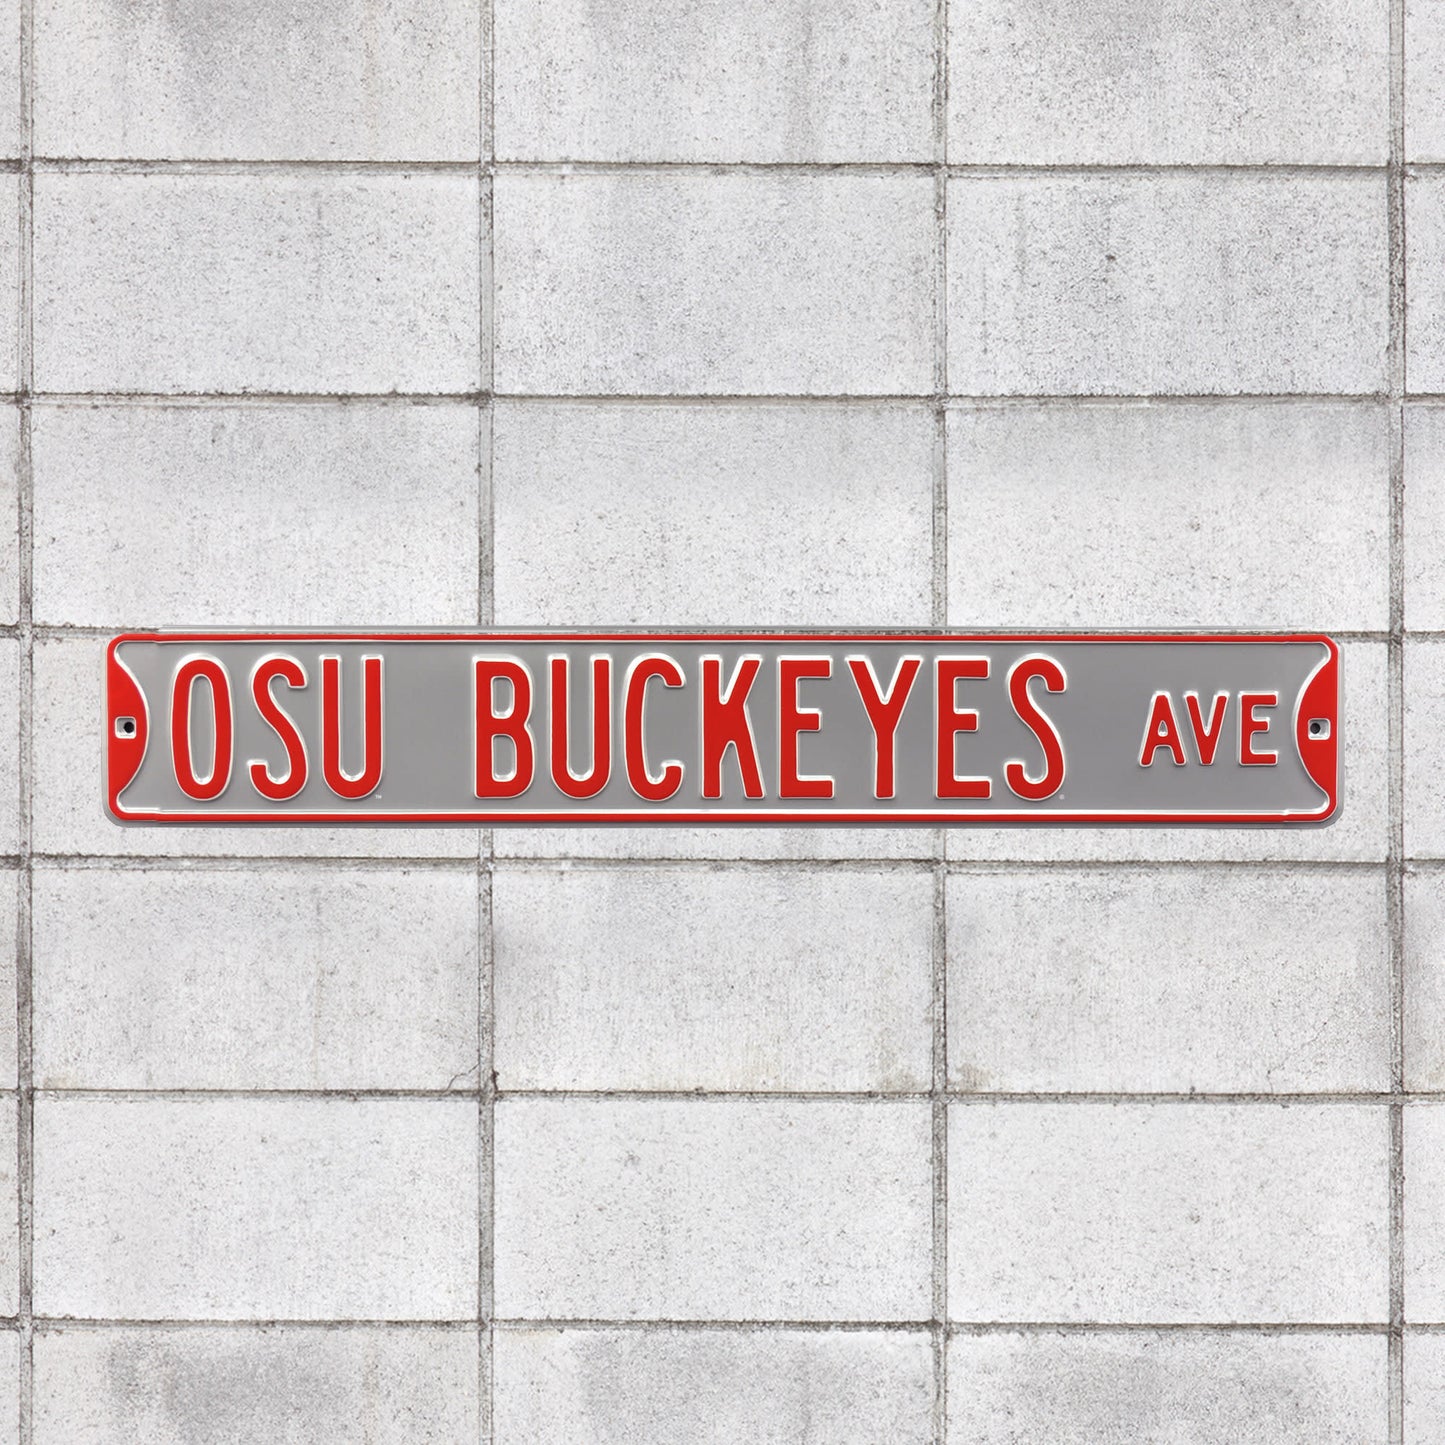 Ohio State Buckeyes: Ohio State Buckeyes Avenue (Silver) - Officially Licensed Metal Street Sign